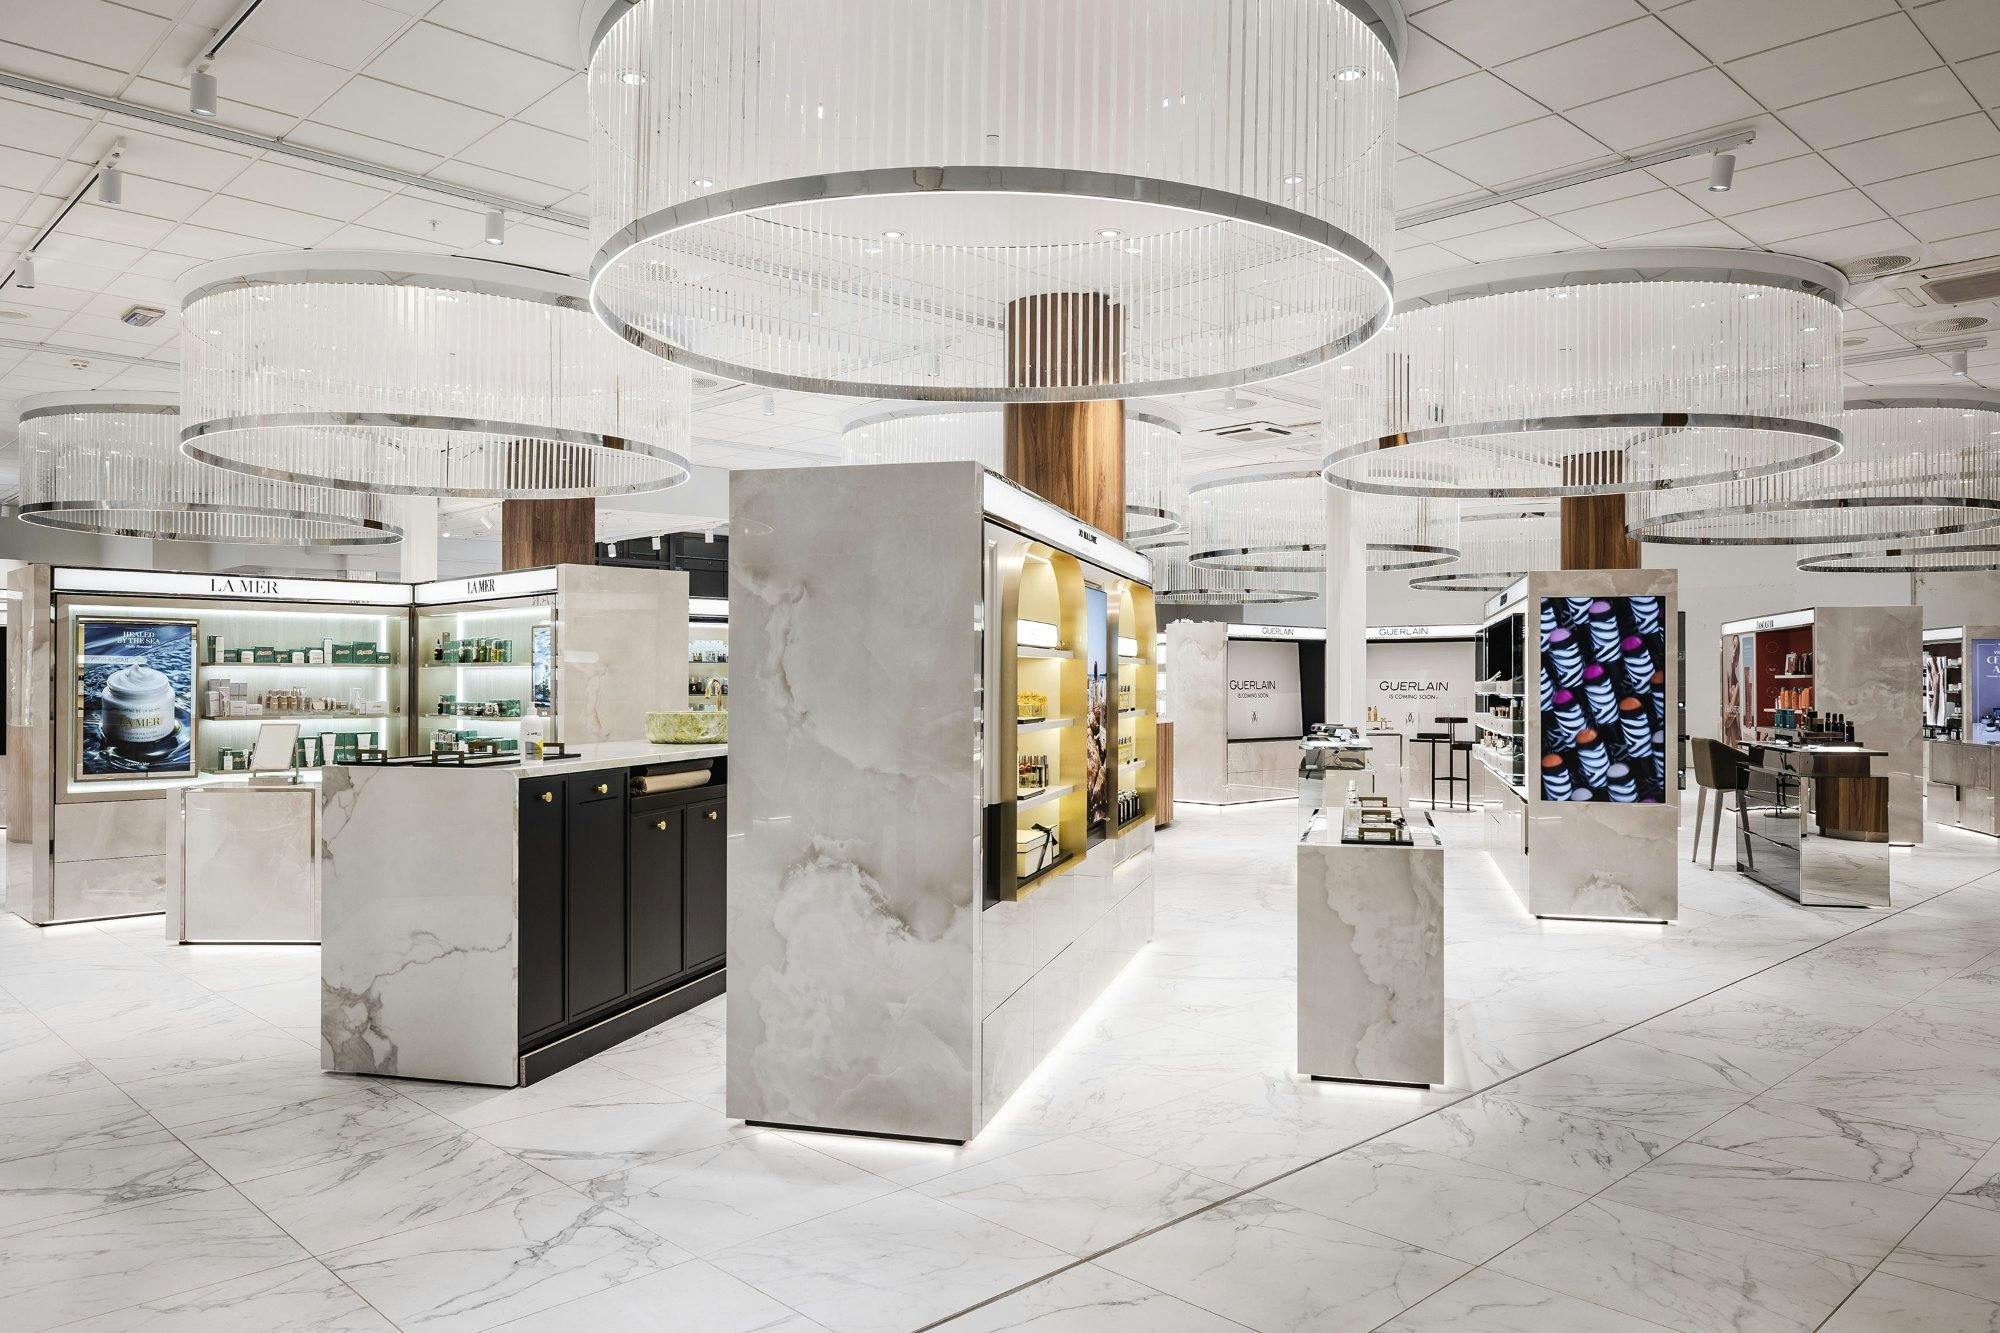 Numéro d'image 36 de la section actuelle de Swiss watchmaker Rado entrusts Cosentino with the renovation of all its shops, starting with the Dubai Mall de Cosentino France